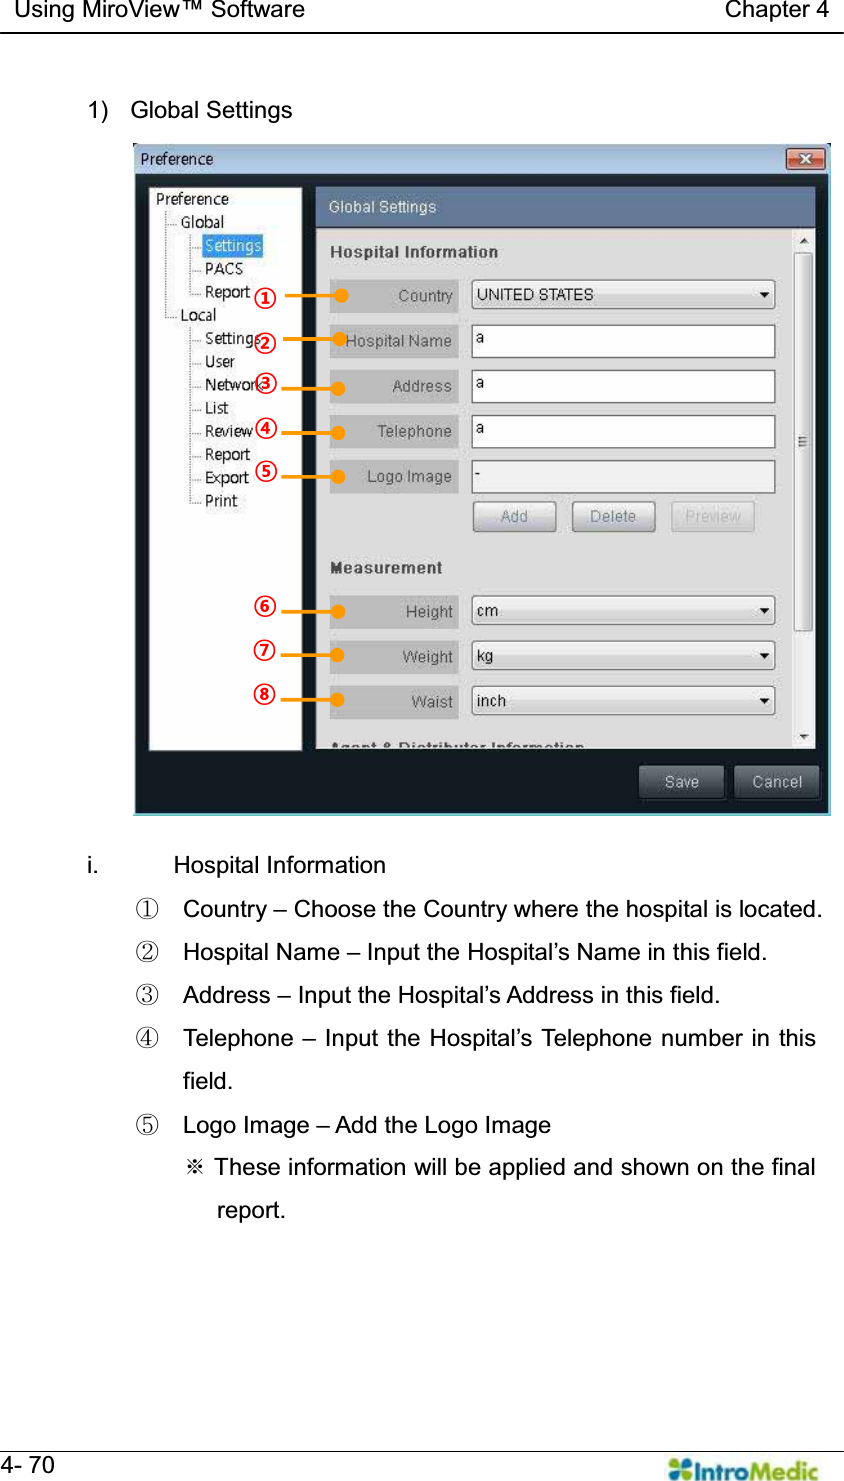   Using MiroView Software                                   Chapter 4   4- 70  1) Global Settings  i. Hospital Information ཛ Country ± Choose the Country where the hospital is located. ཛྷ Hospital Name ± ,QSXWWKH+RVSLWDO¶V1DPHLQ this field. ཝ Address ± ,QSXWWKH+RVSLWDO¶V$GGUHVVLQWKLVILHOG ཞ Telephone ± ,QSXWWKH+RVSLWDO¶V7HOHSKRQHQXPEHULQWKLVfield. ཟ Logo Image ± Add the Logo Image ୔ These information will be applied and shown on the final    report. § ¨ © ¢ £ ¤ ¥ ¦ 